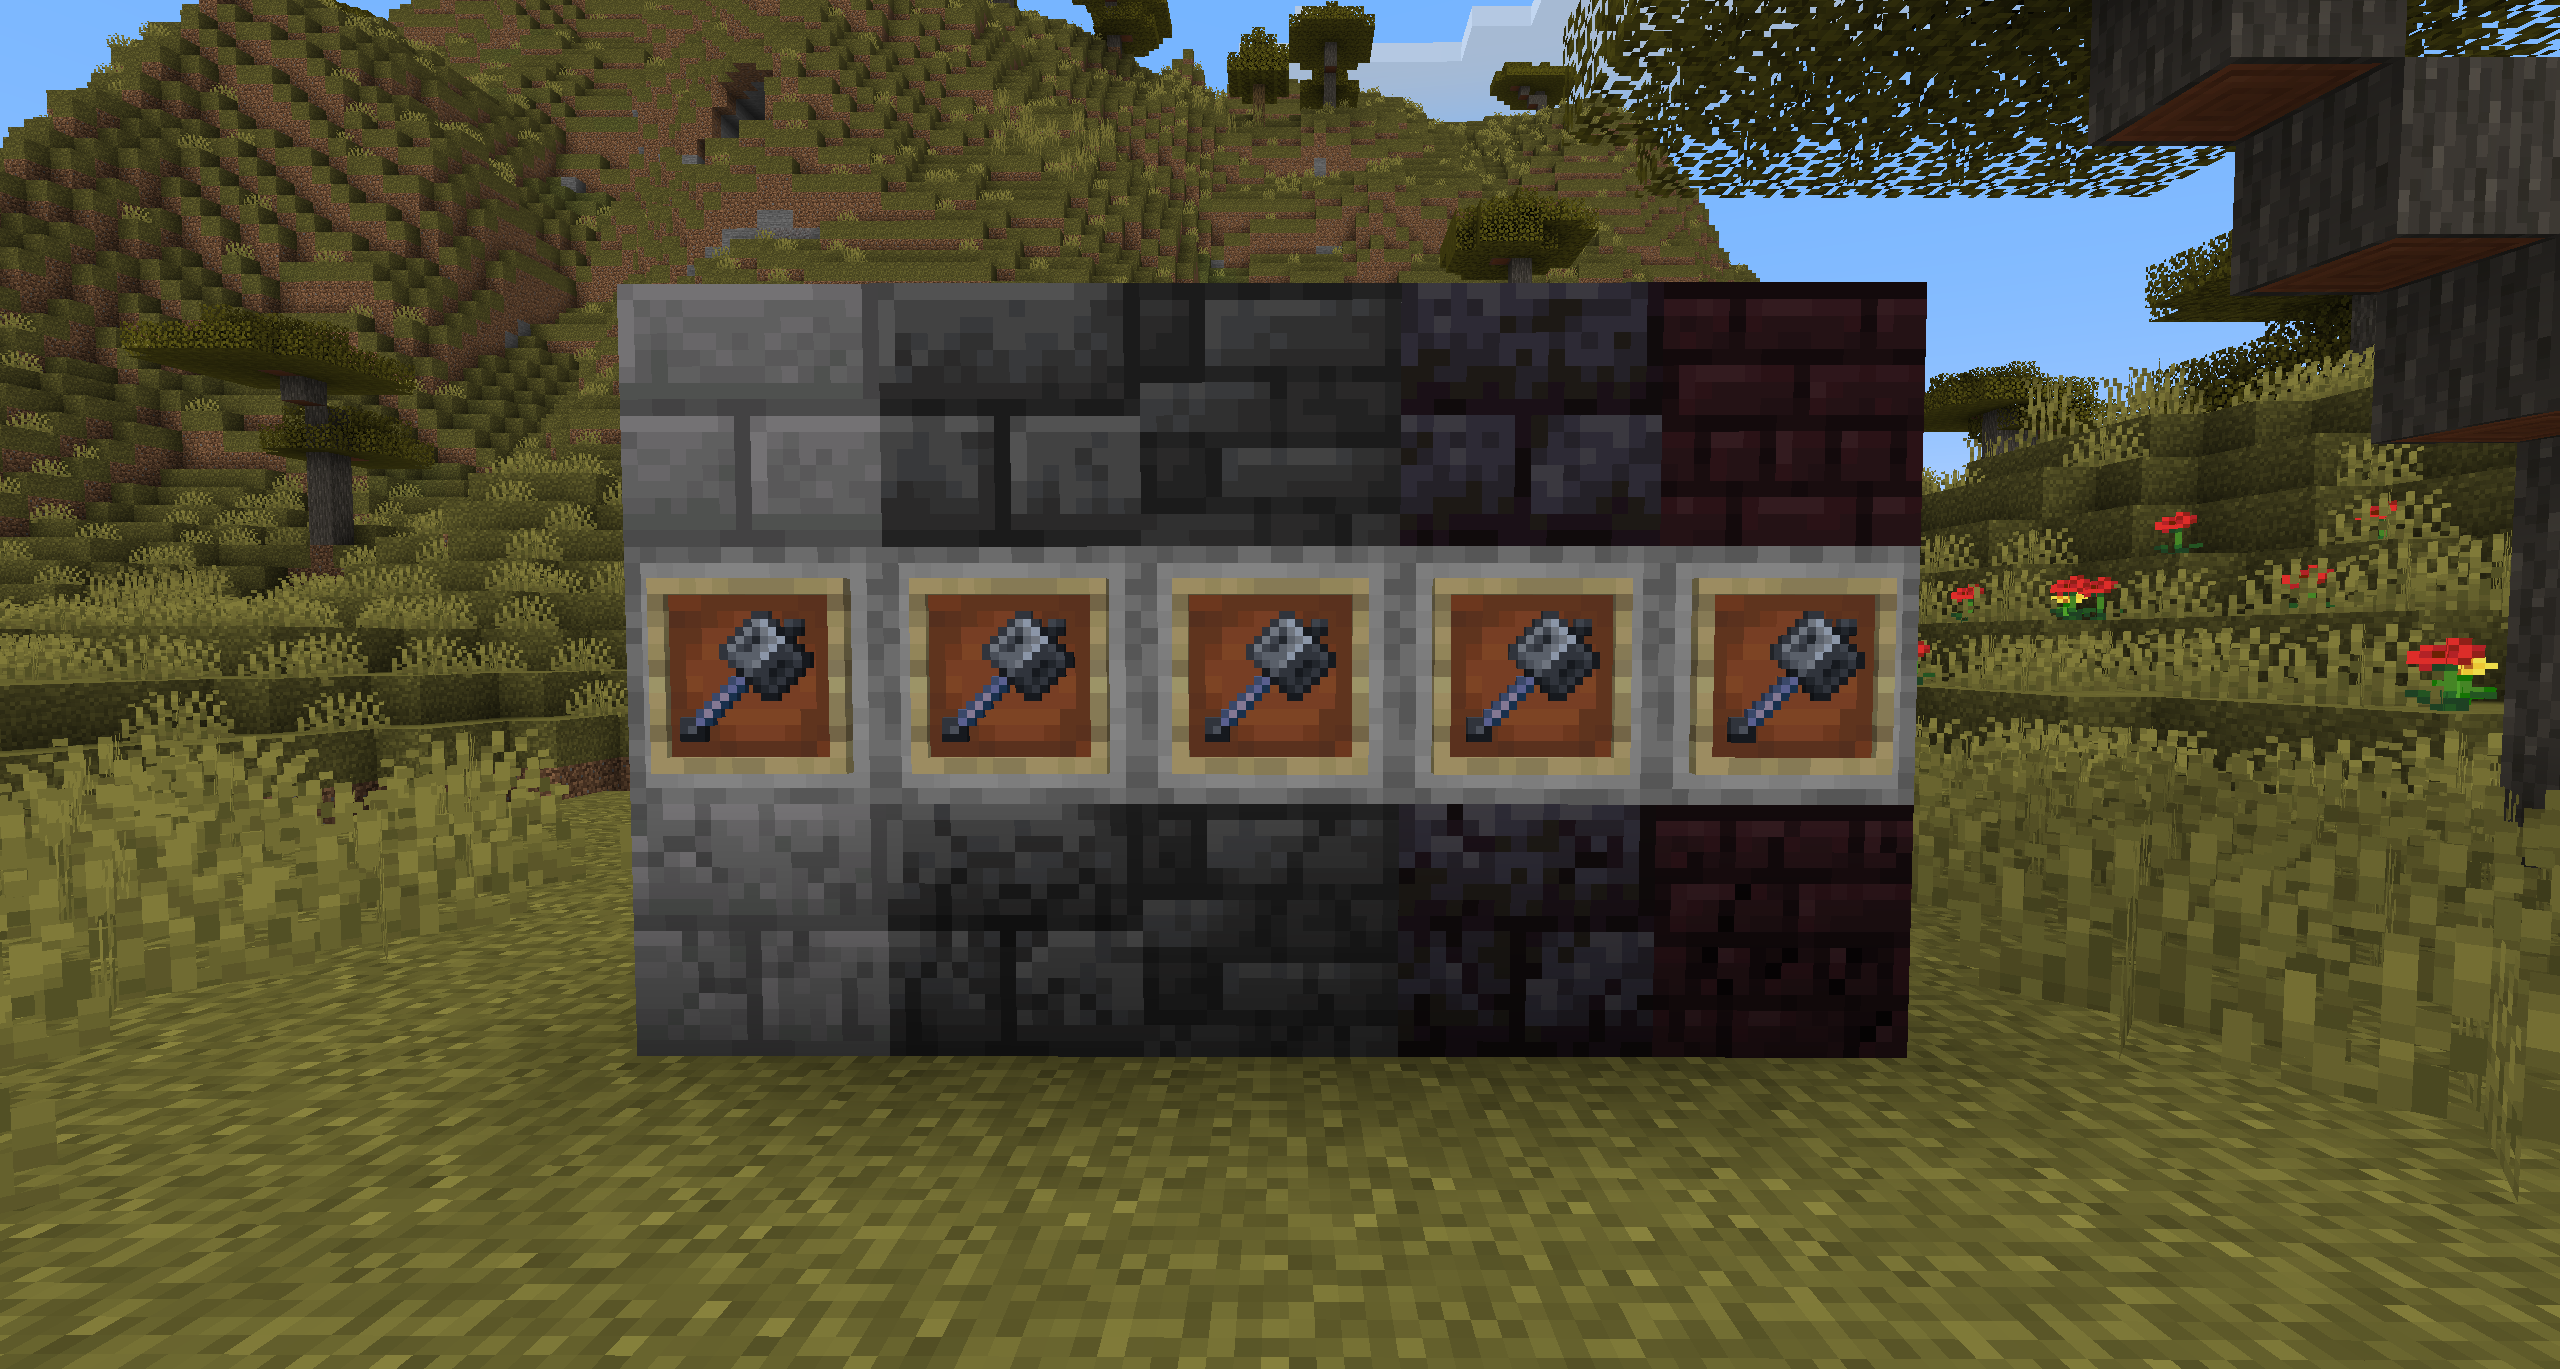 Blocks that can be cracked